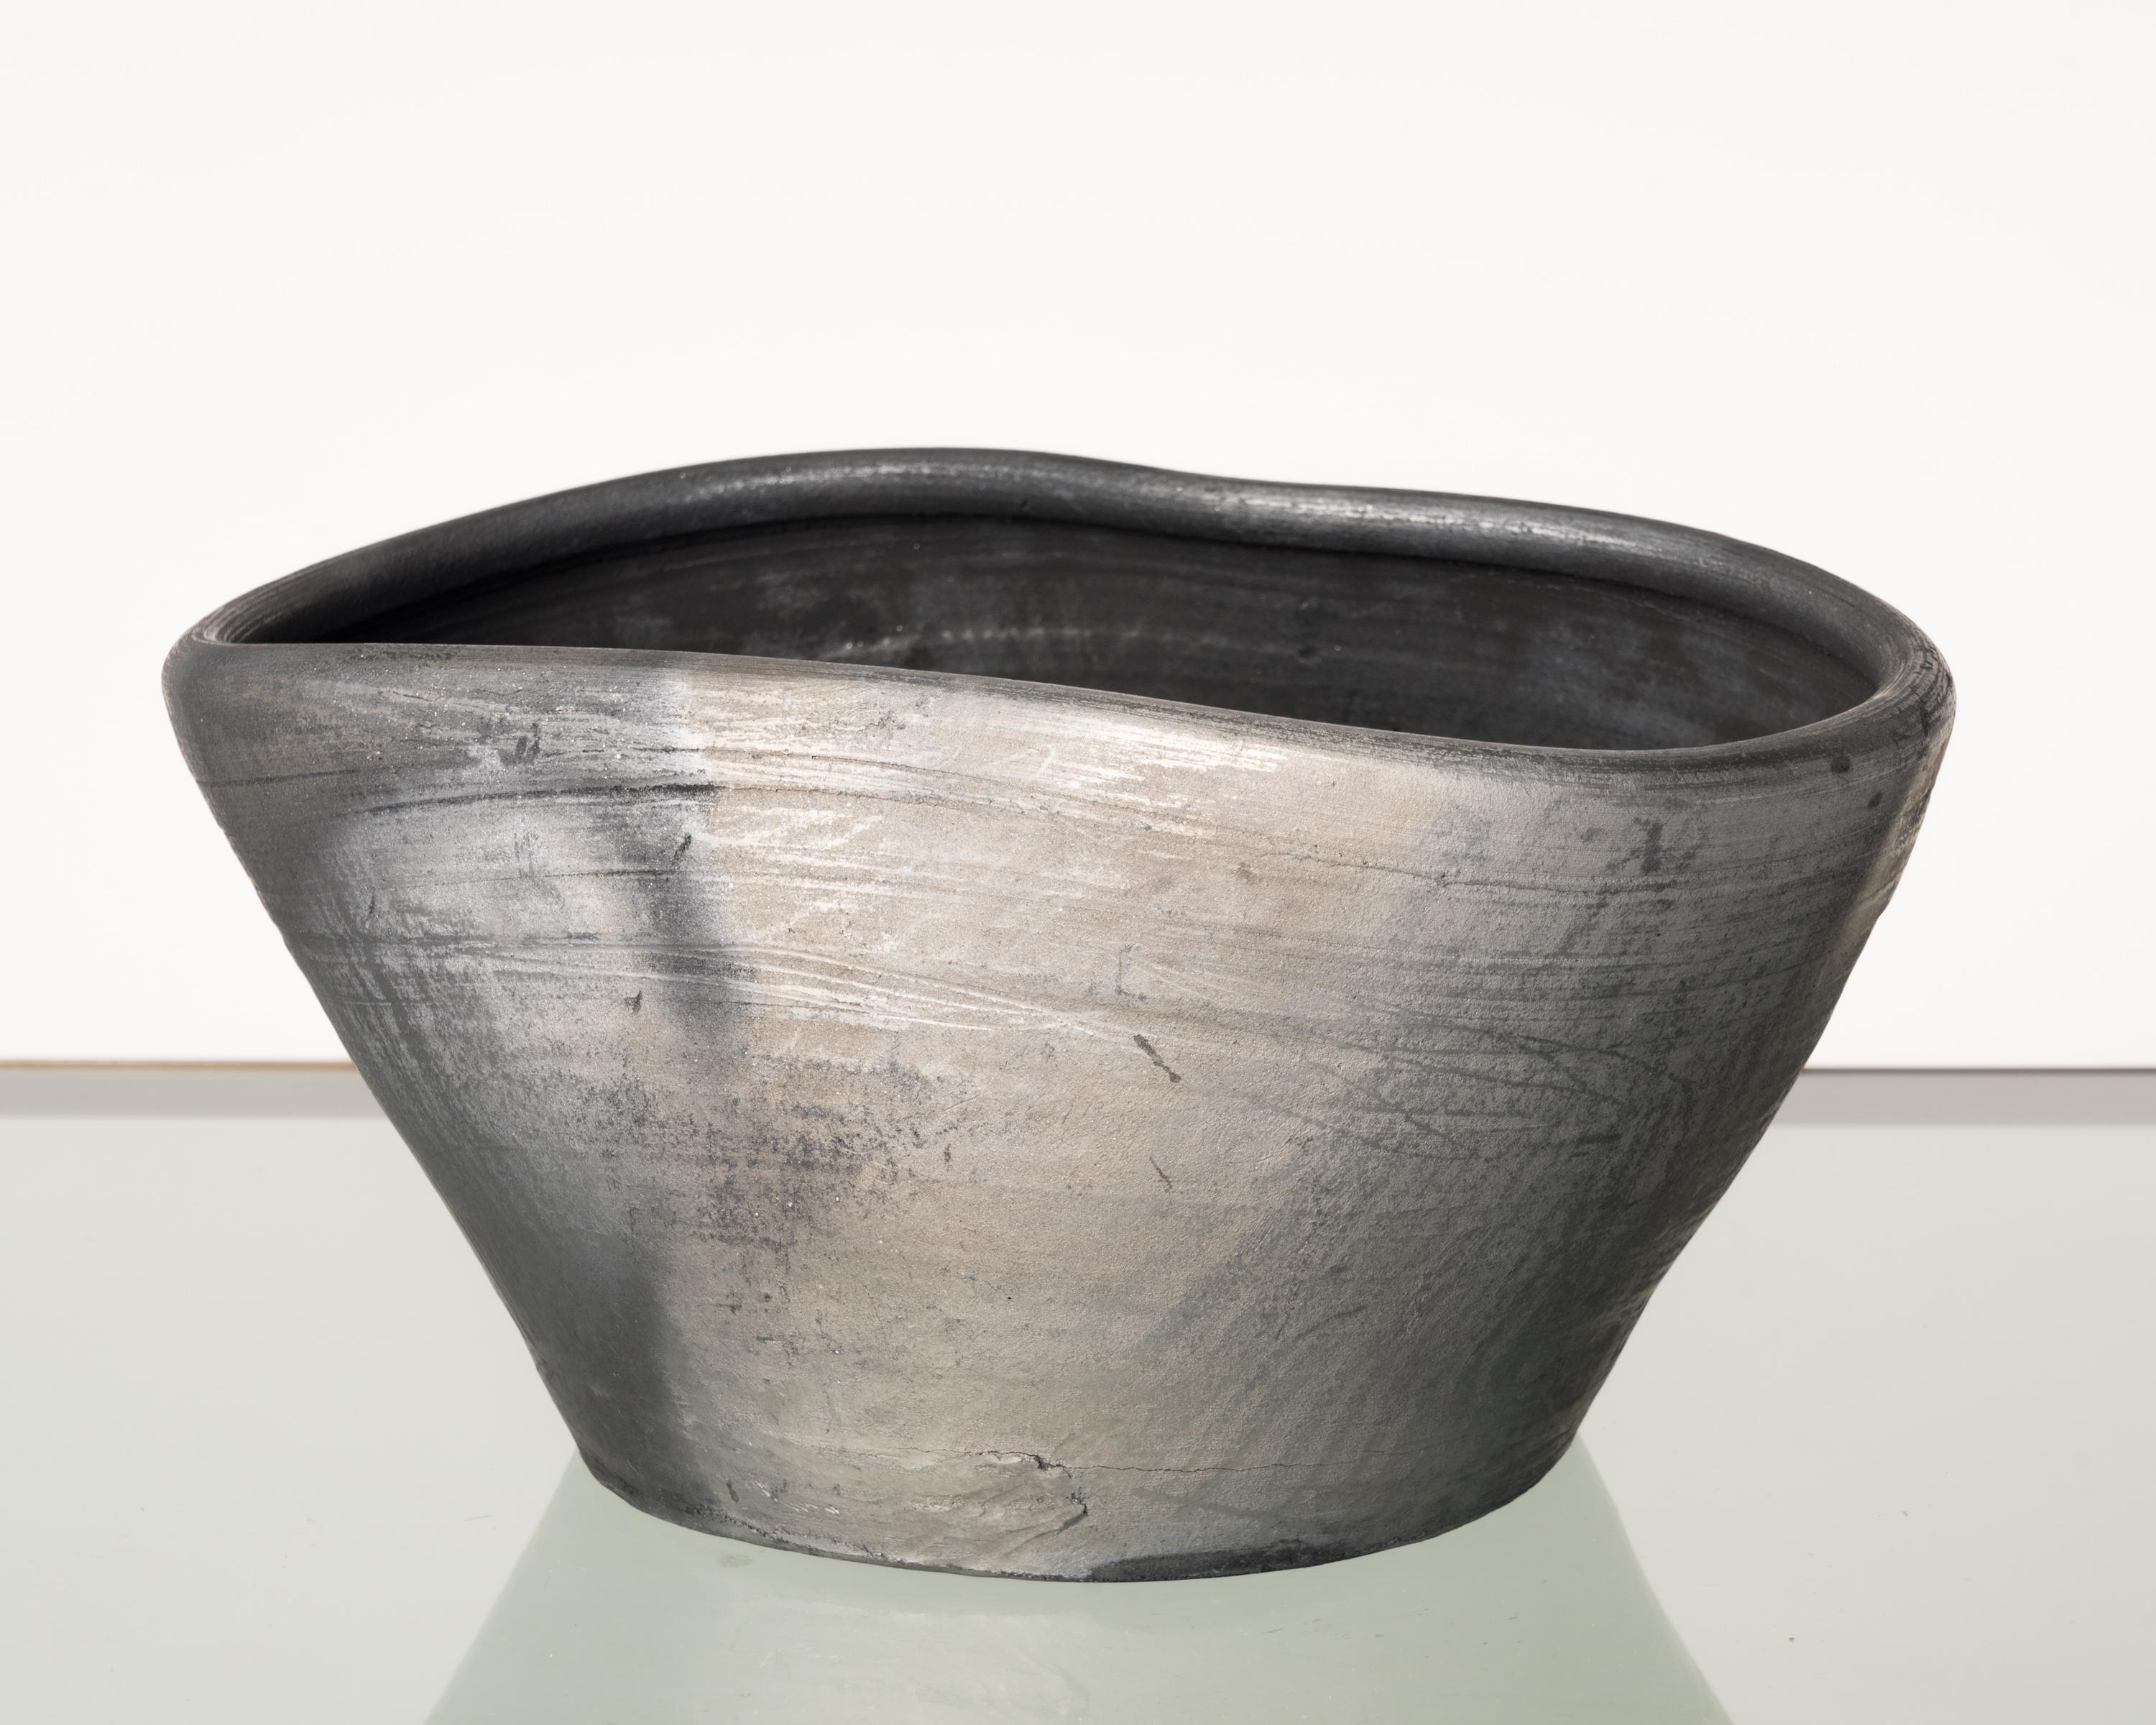 Unique artisan crafted charcoal terracotta bowl. These pieces are entirely handmade. Textures, shapes, finishes and sizes can vary. We carry a selection of them at all times. Feel free to inquire about other available sizes and finishes.
This item